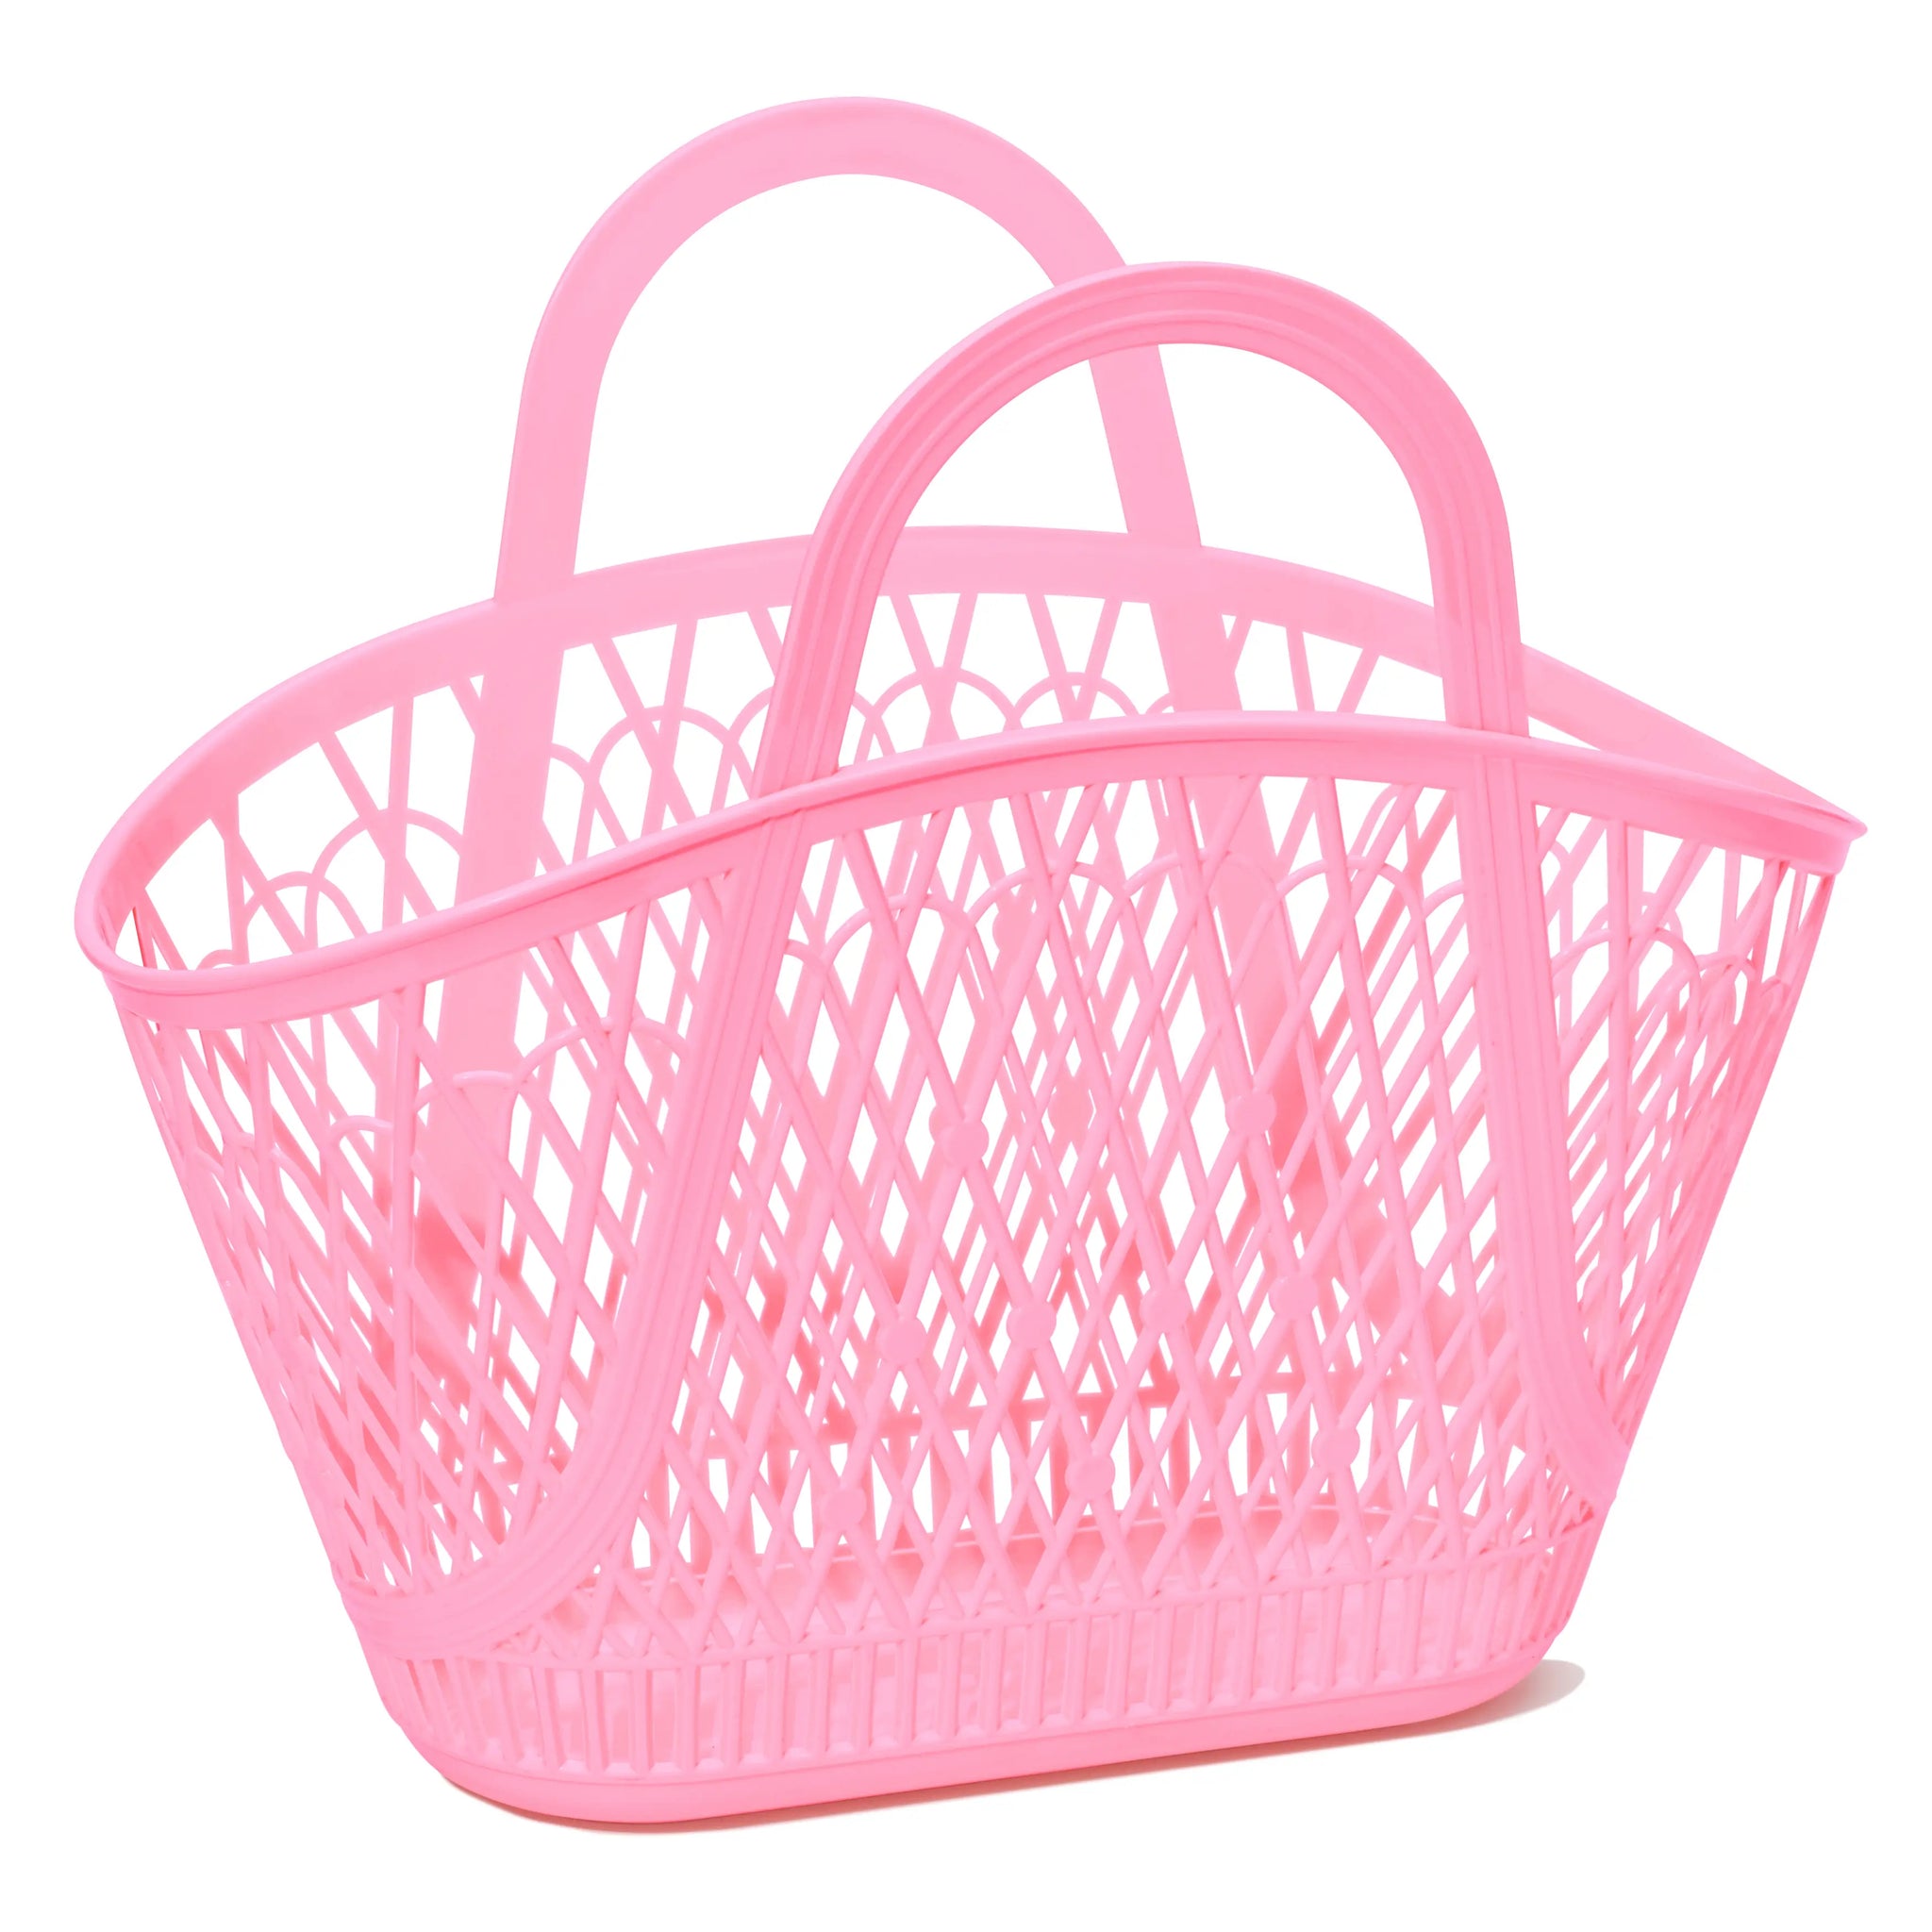 A large bubblegum pink rounded handle bag in a market basket style with a criss-cross pattern and flat base